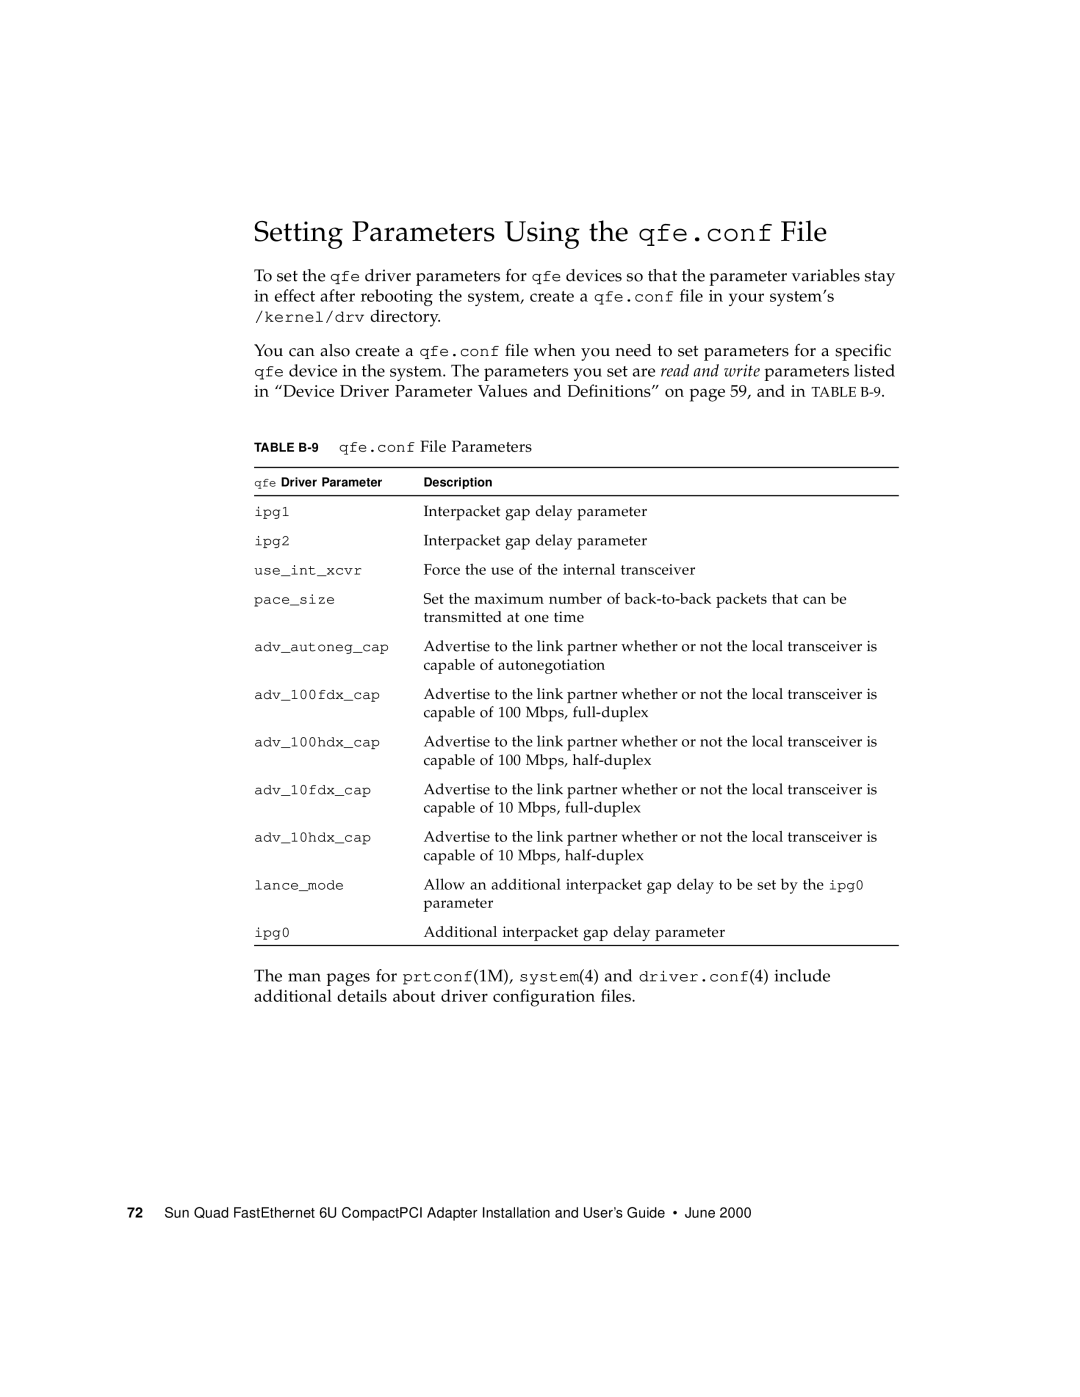 Sun Microsystems 6U manual Setting Parameters Using the qfe.conf File, TABLE B-9 qfe.conf File Parameters 